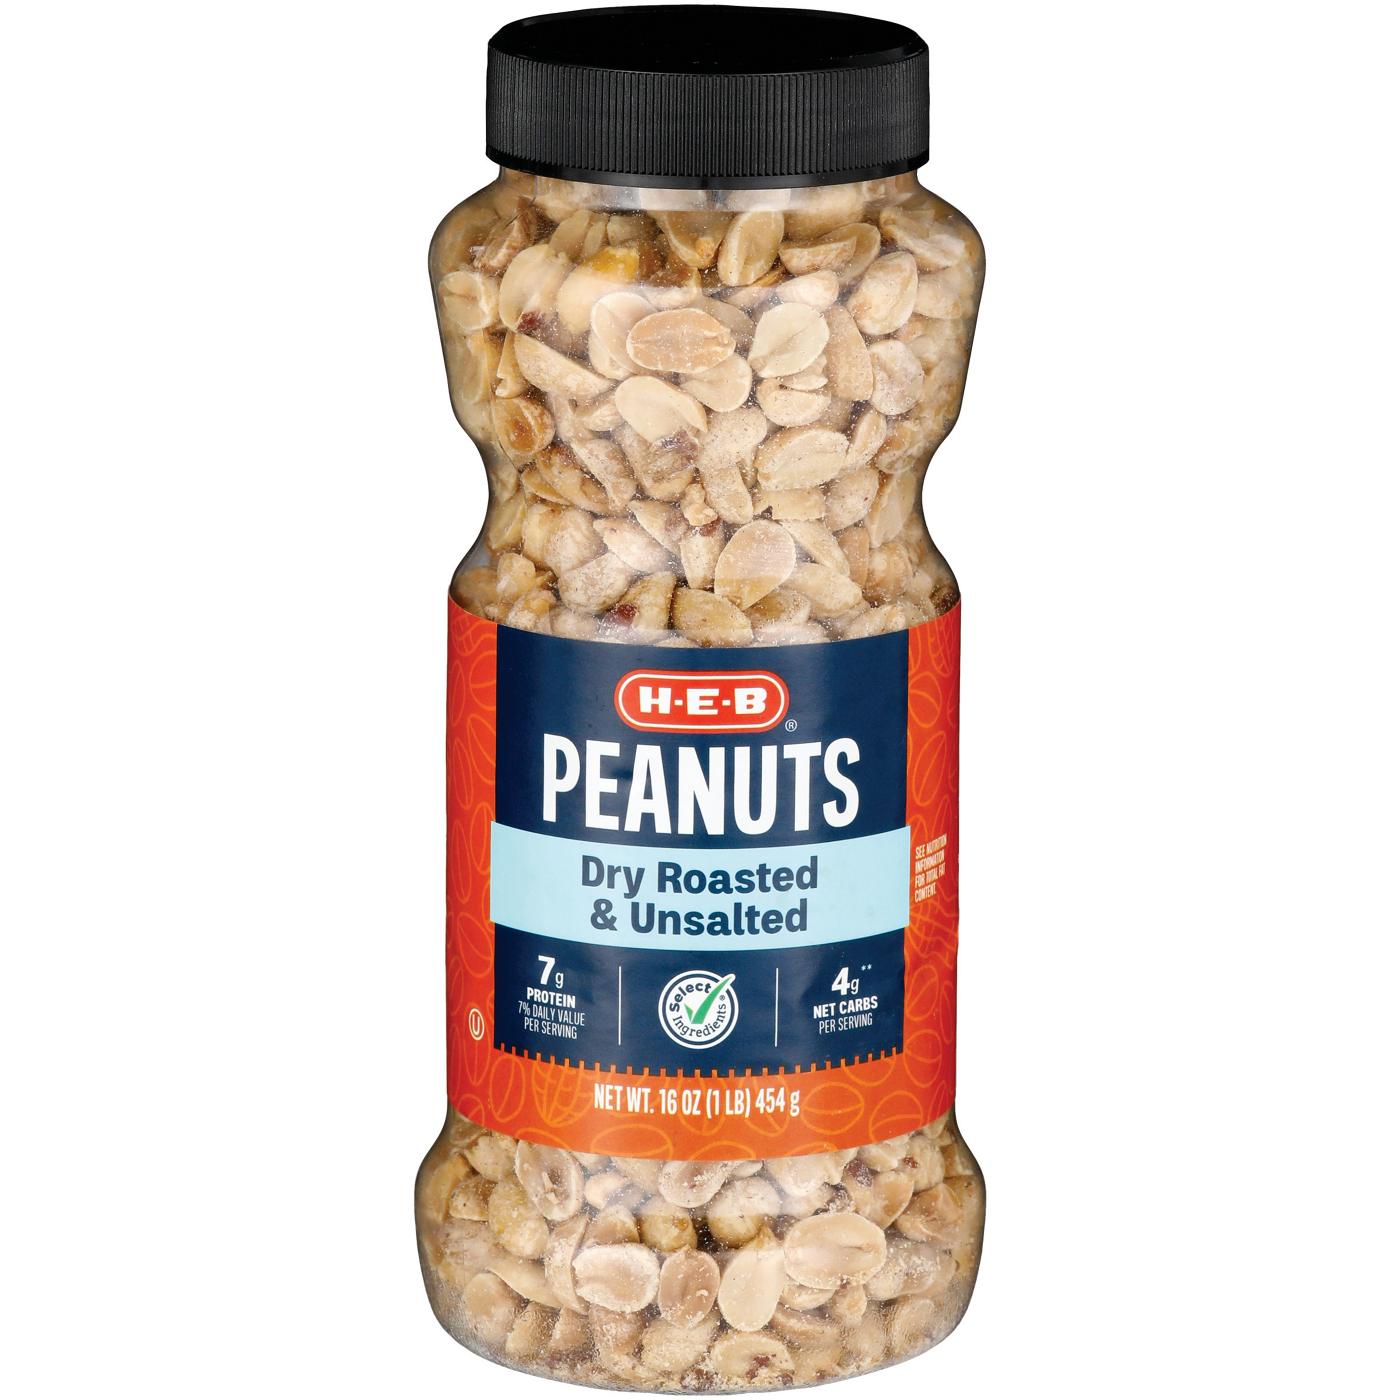 H-E-B Unsalted Dry Roasted Peanuts; image 1 of 2